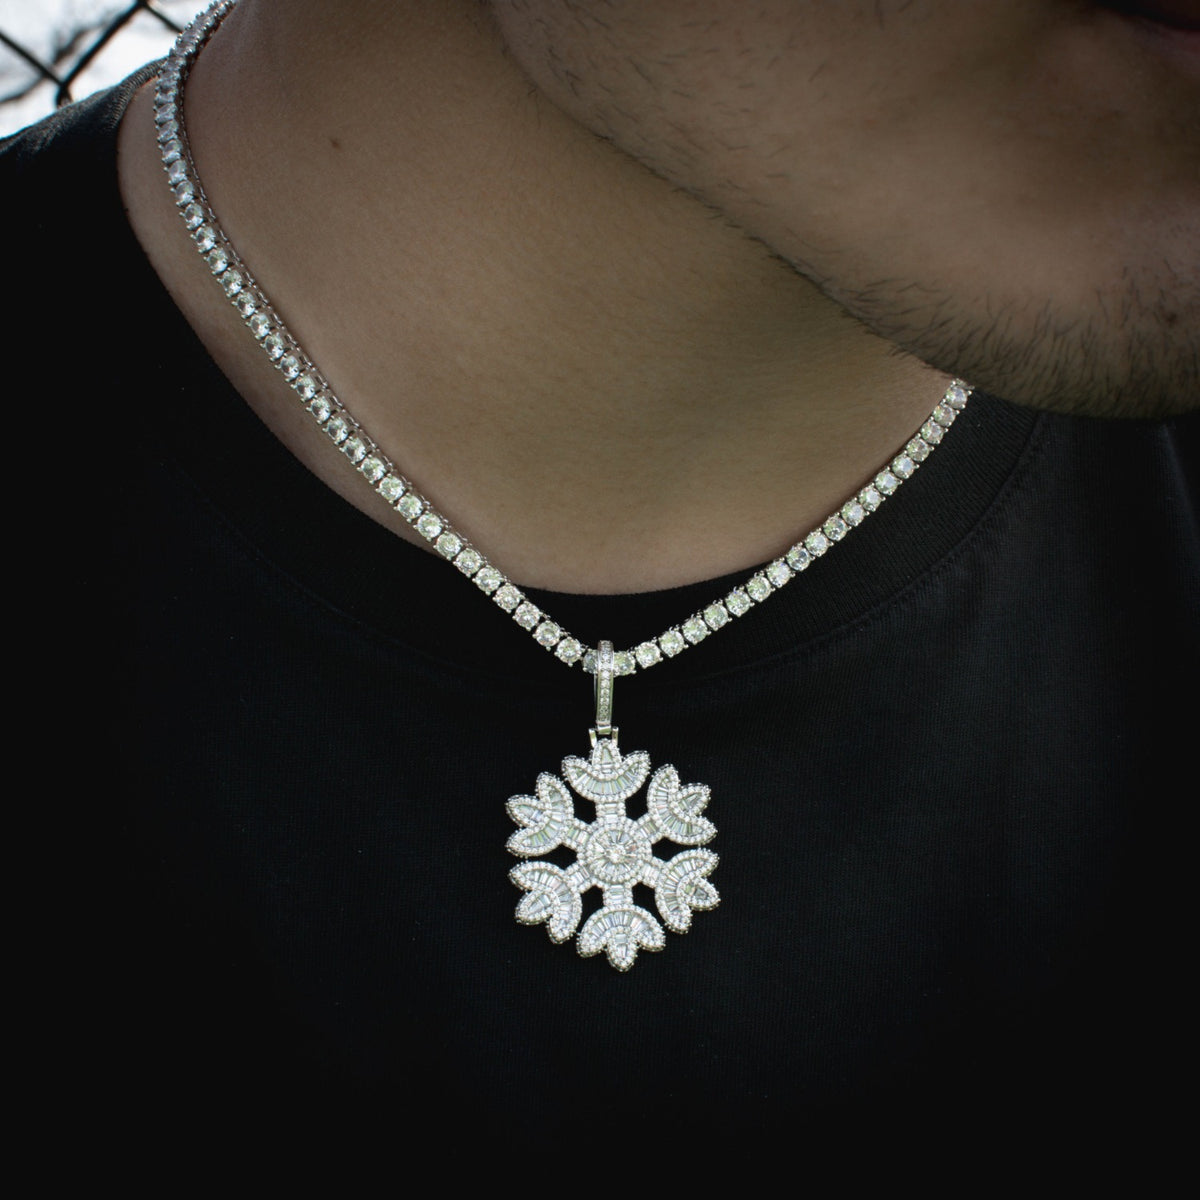 Diamond Snowflake Necklace in White Gold - The Jewelry Plug